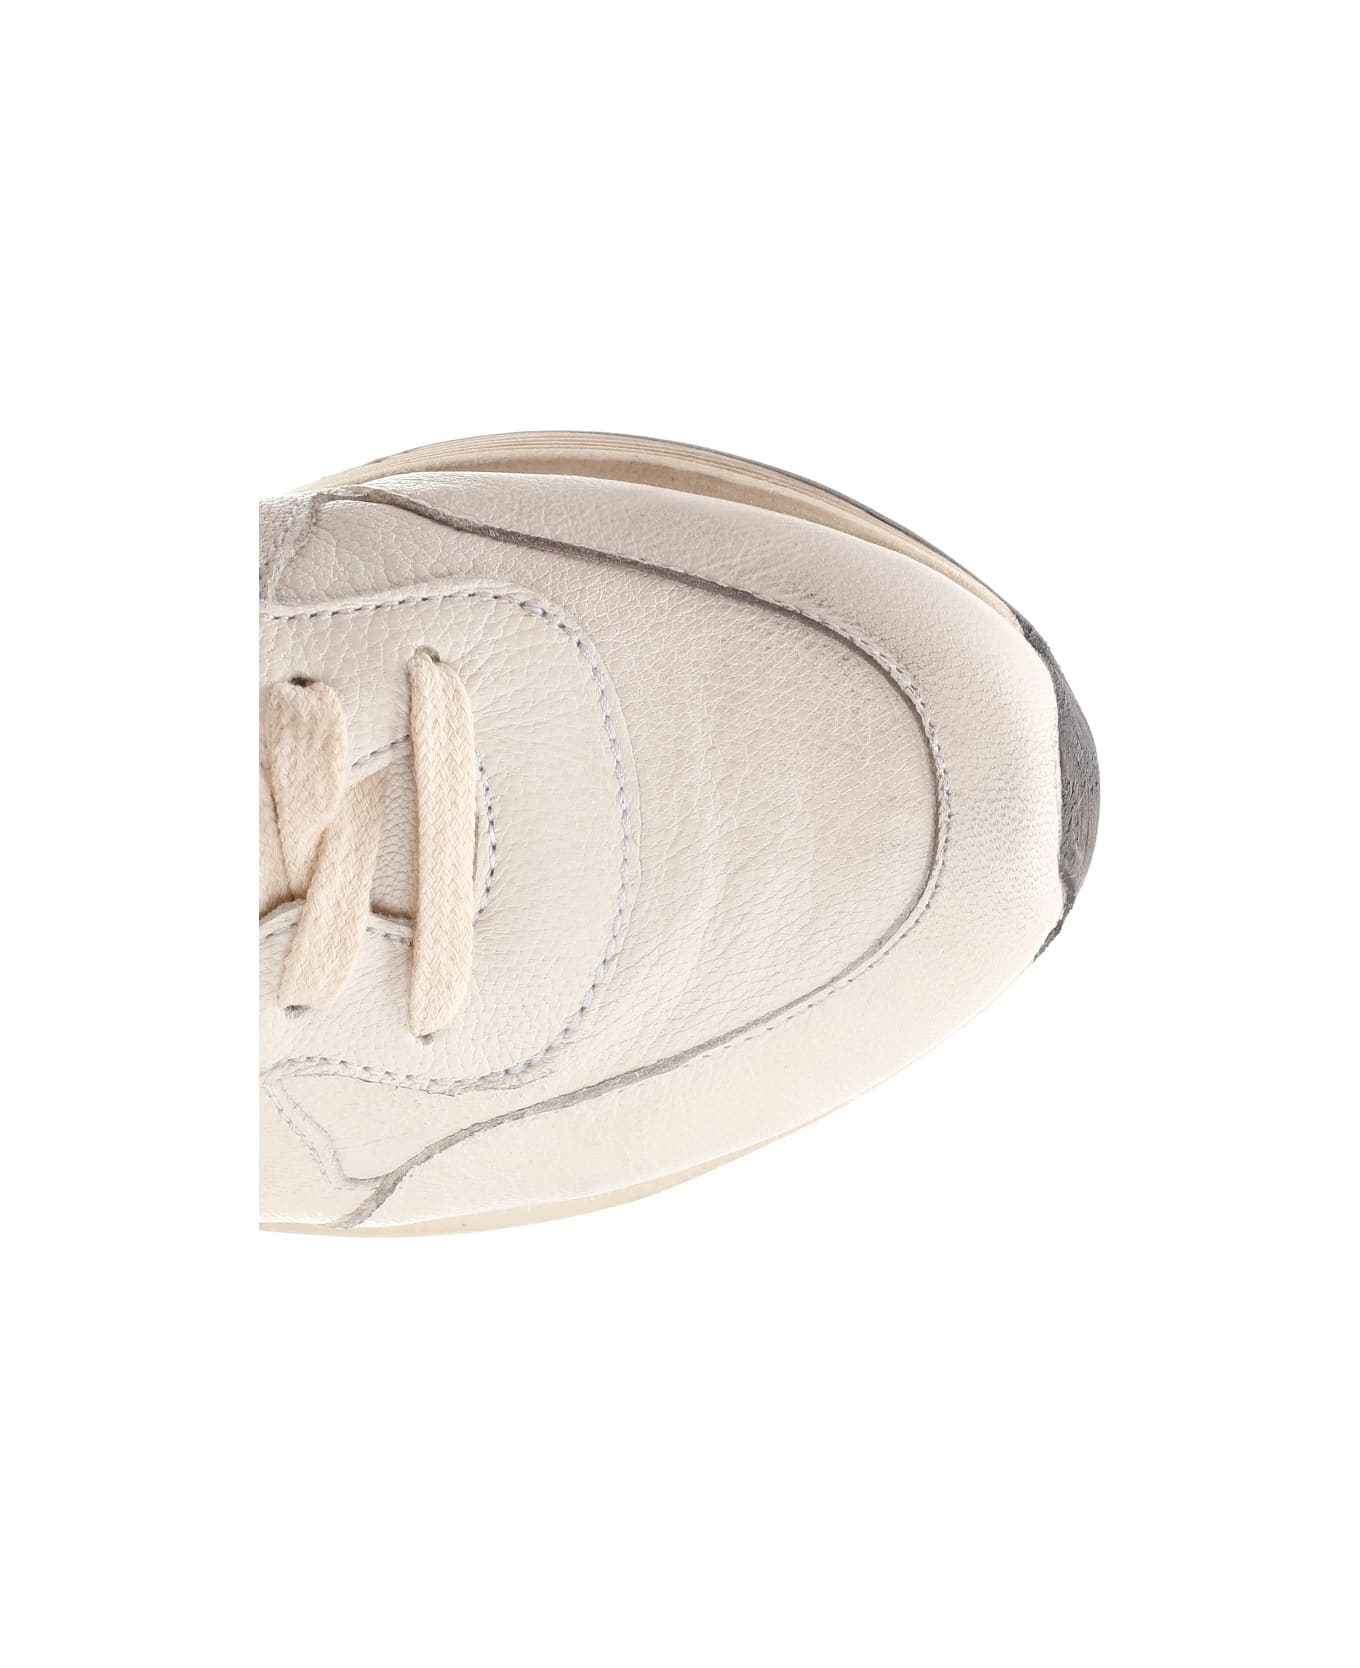 Golden Goose Running Sole Sneakers - White/Silver/Gold